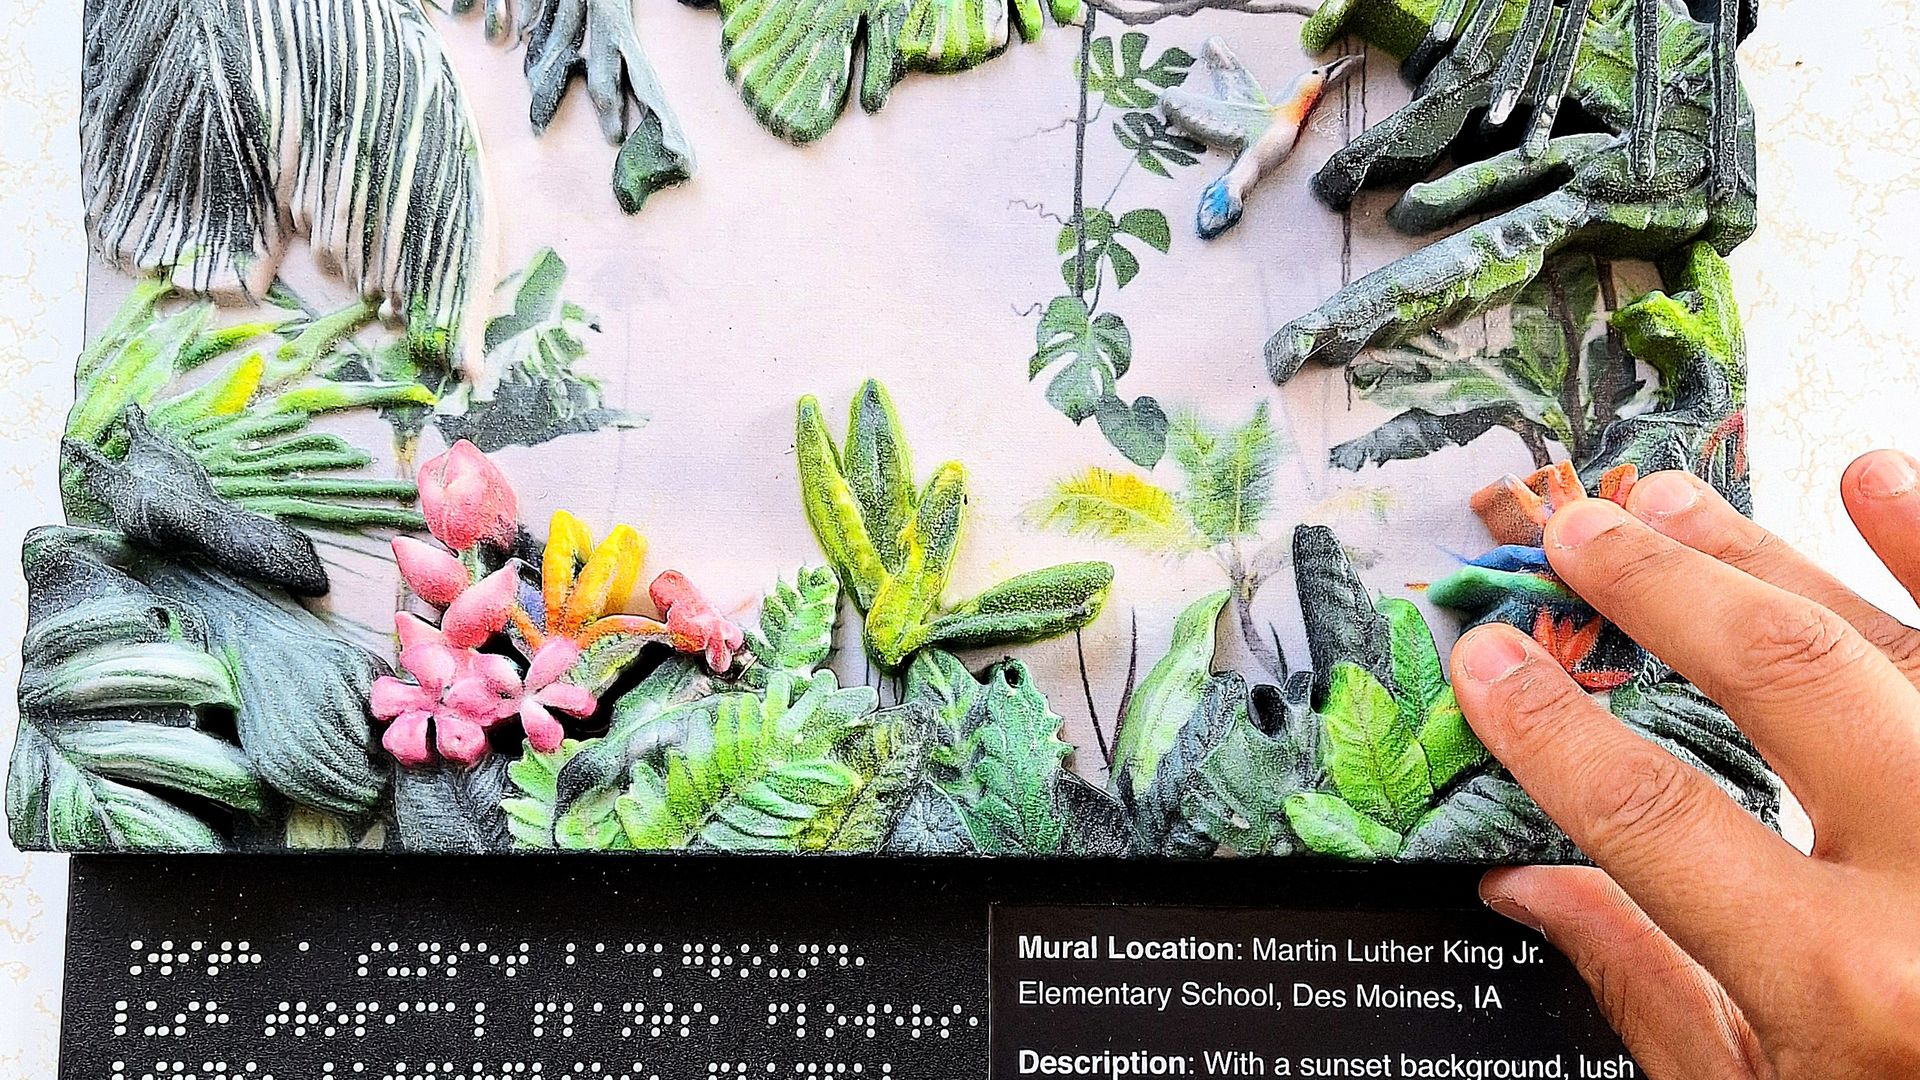 A 3D printed mural with a hand over it showing braille